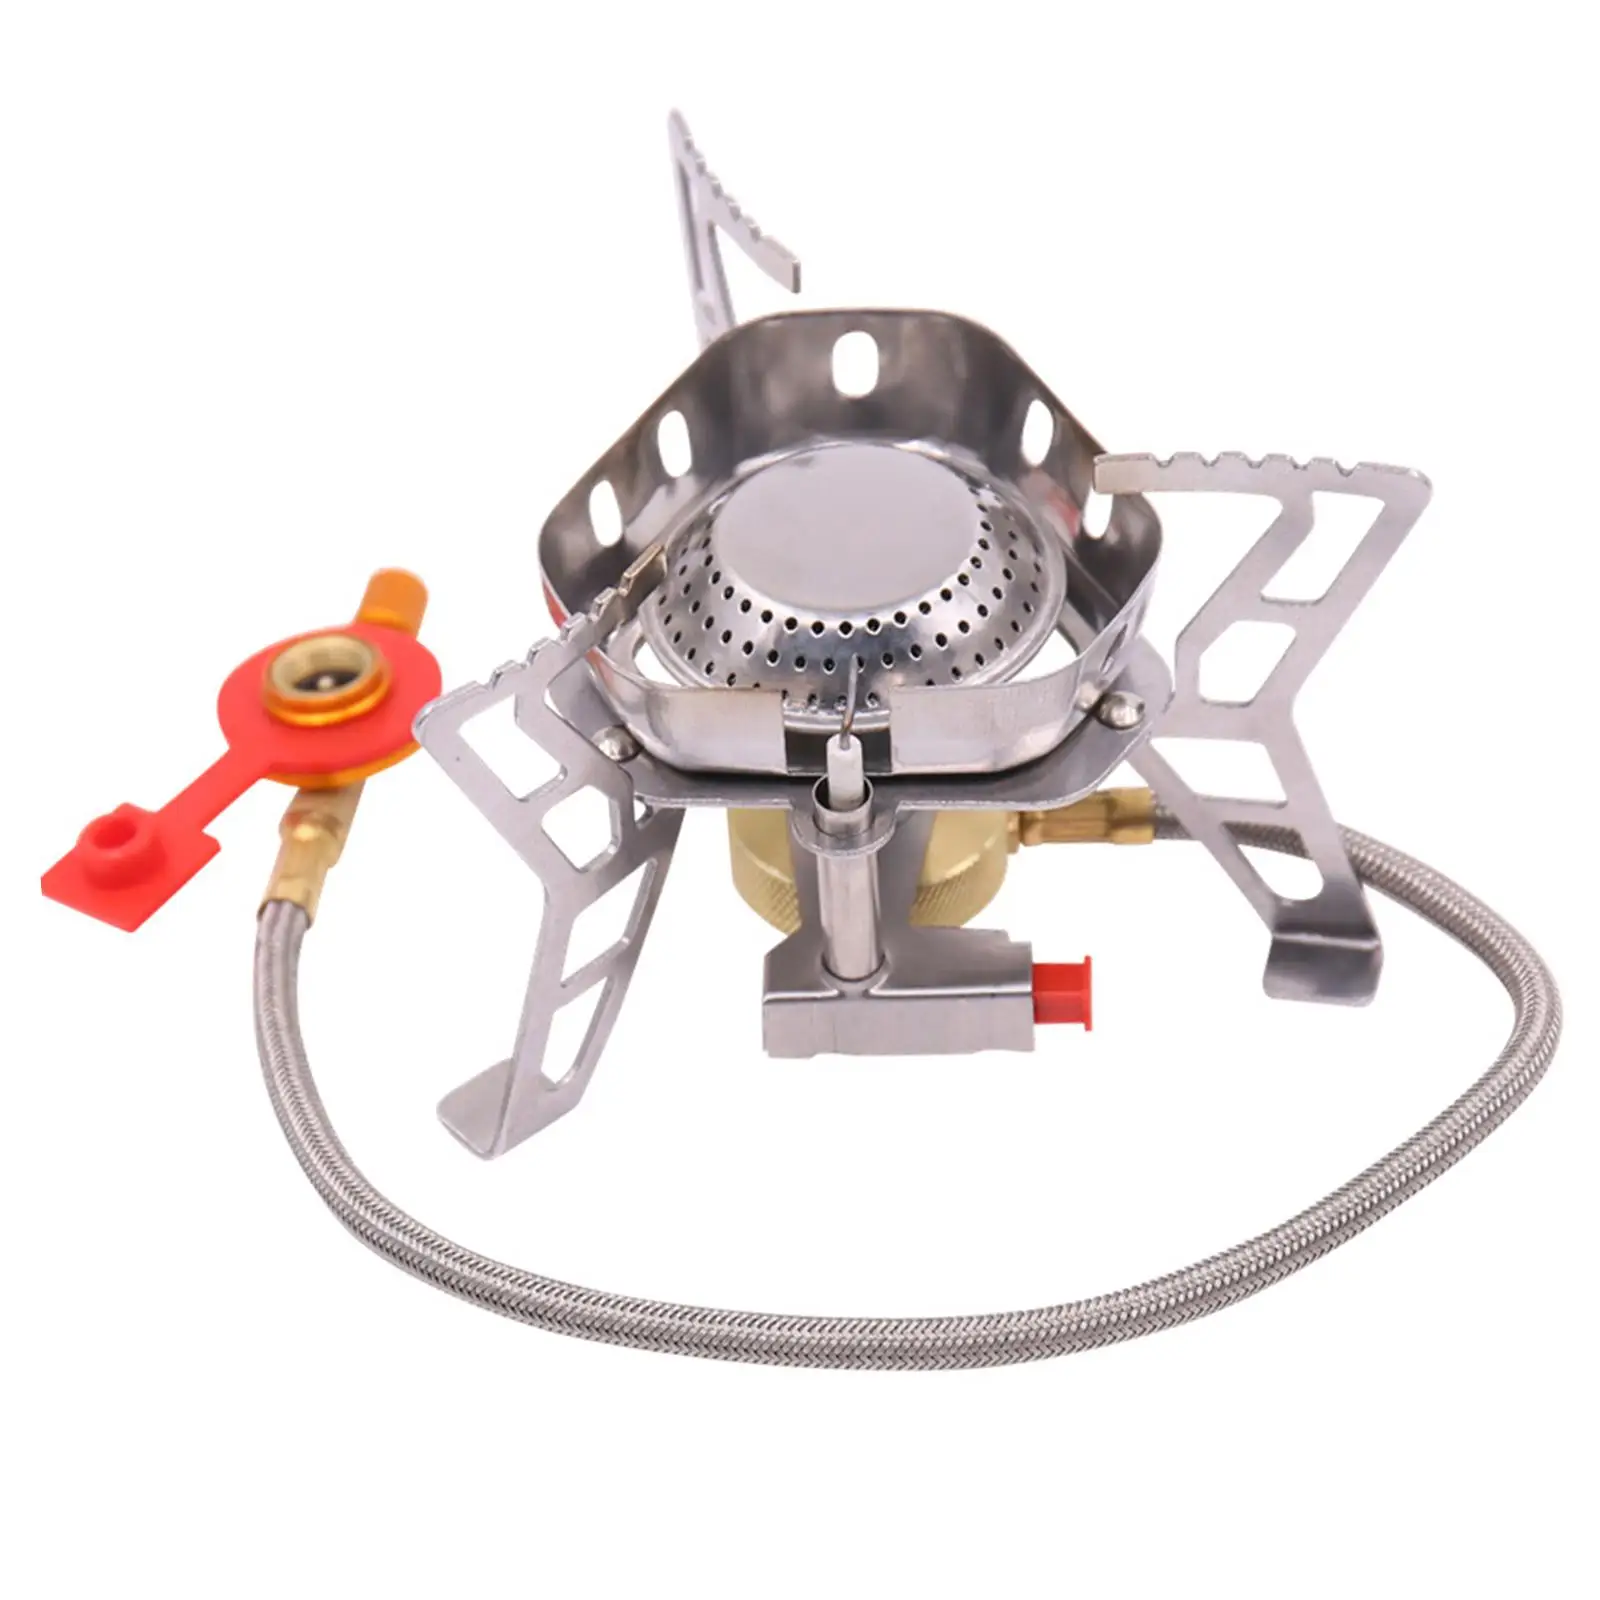 3600W Camping Stove with Storage Case Portable Ultralight Camp Stove Outdoor Stove Burner Windproof for Traveling Hiking Fishing